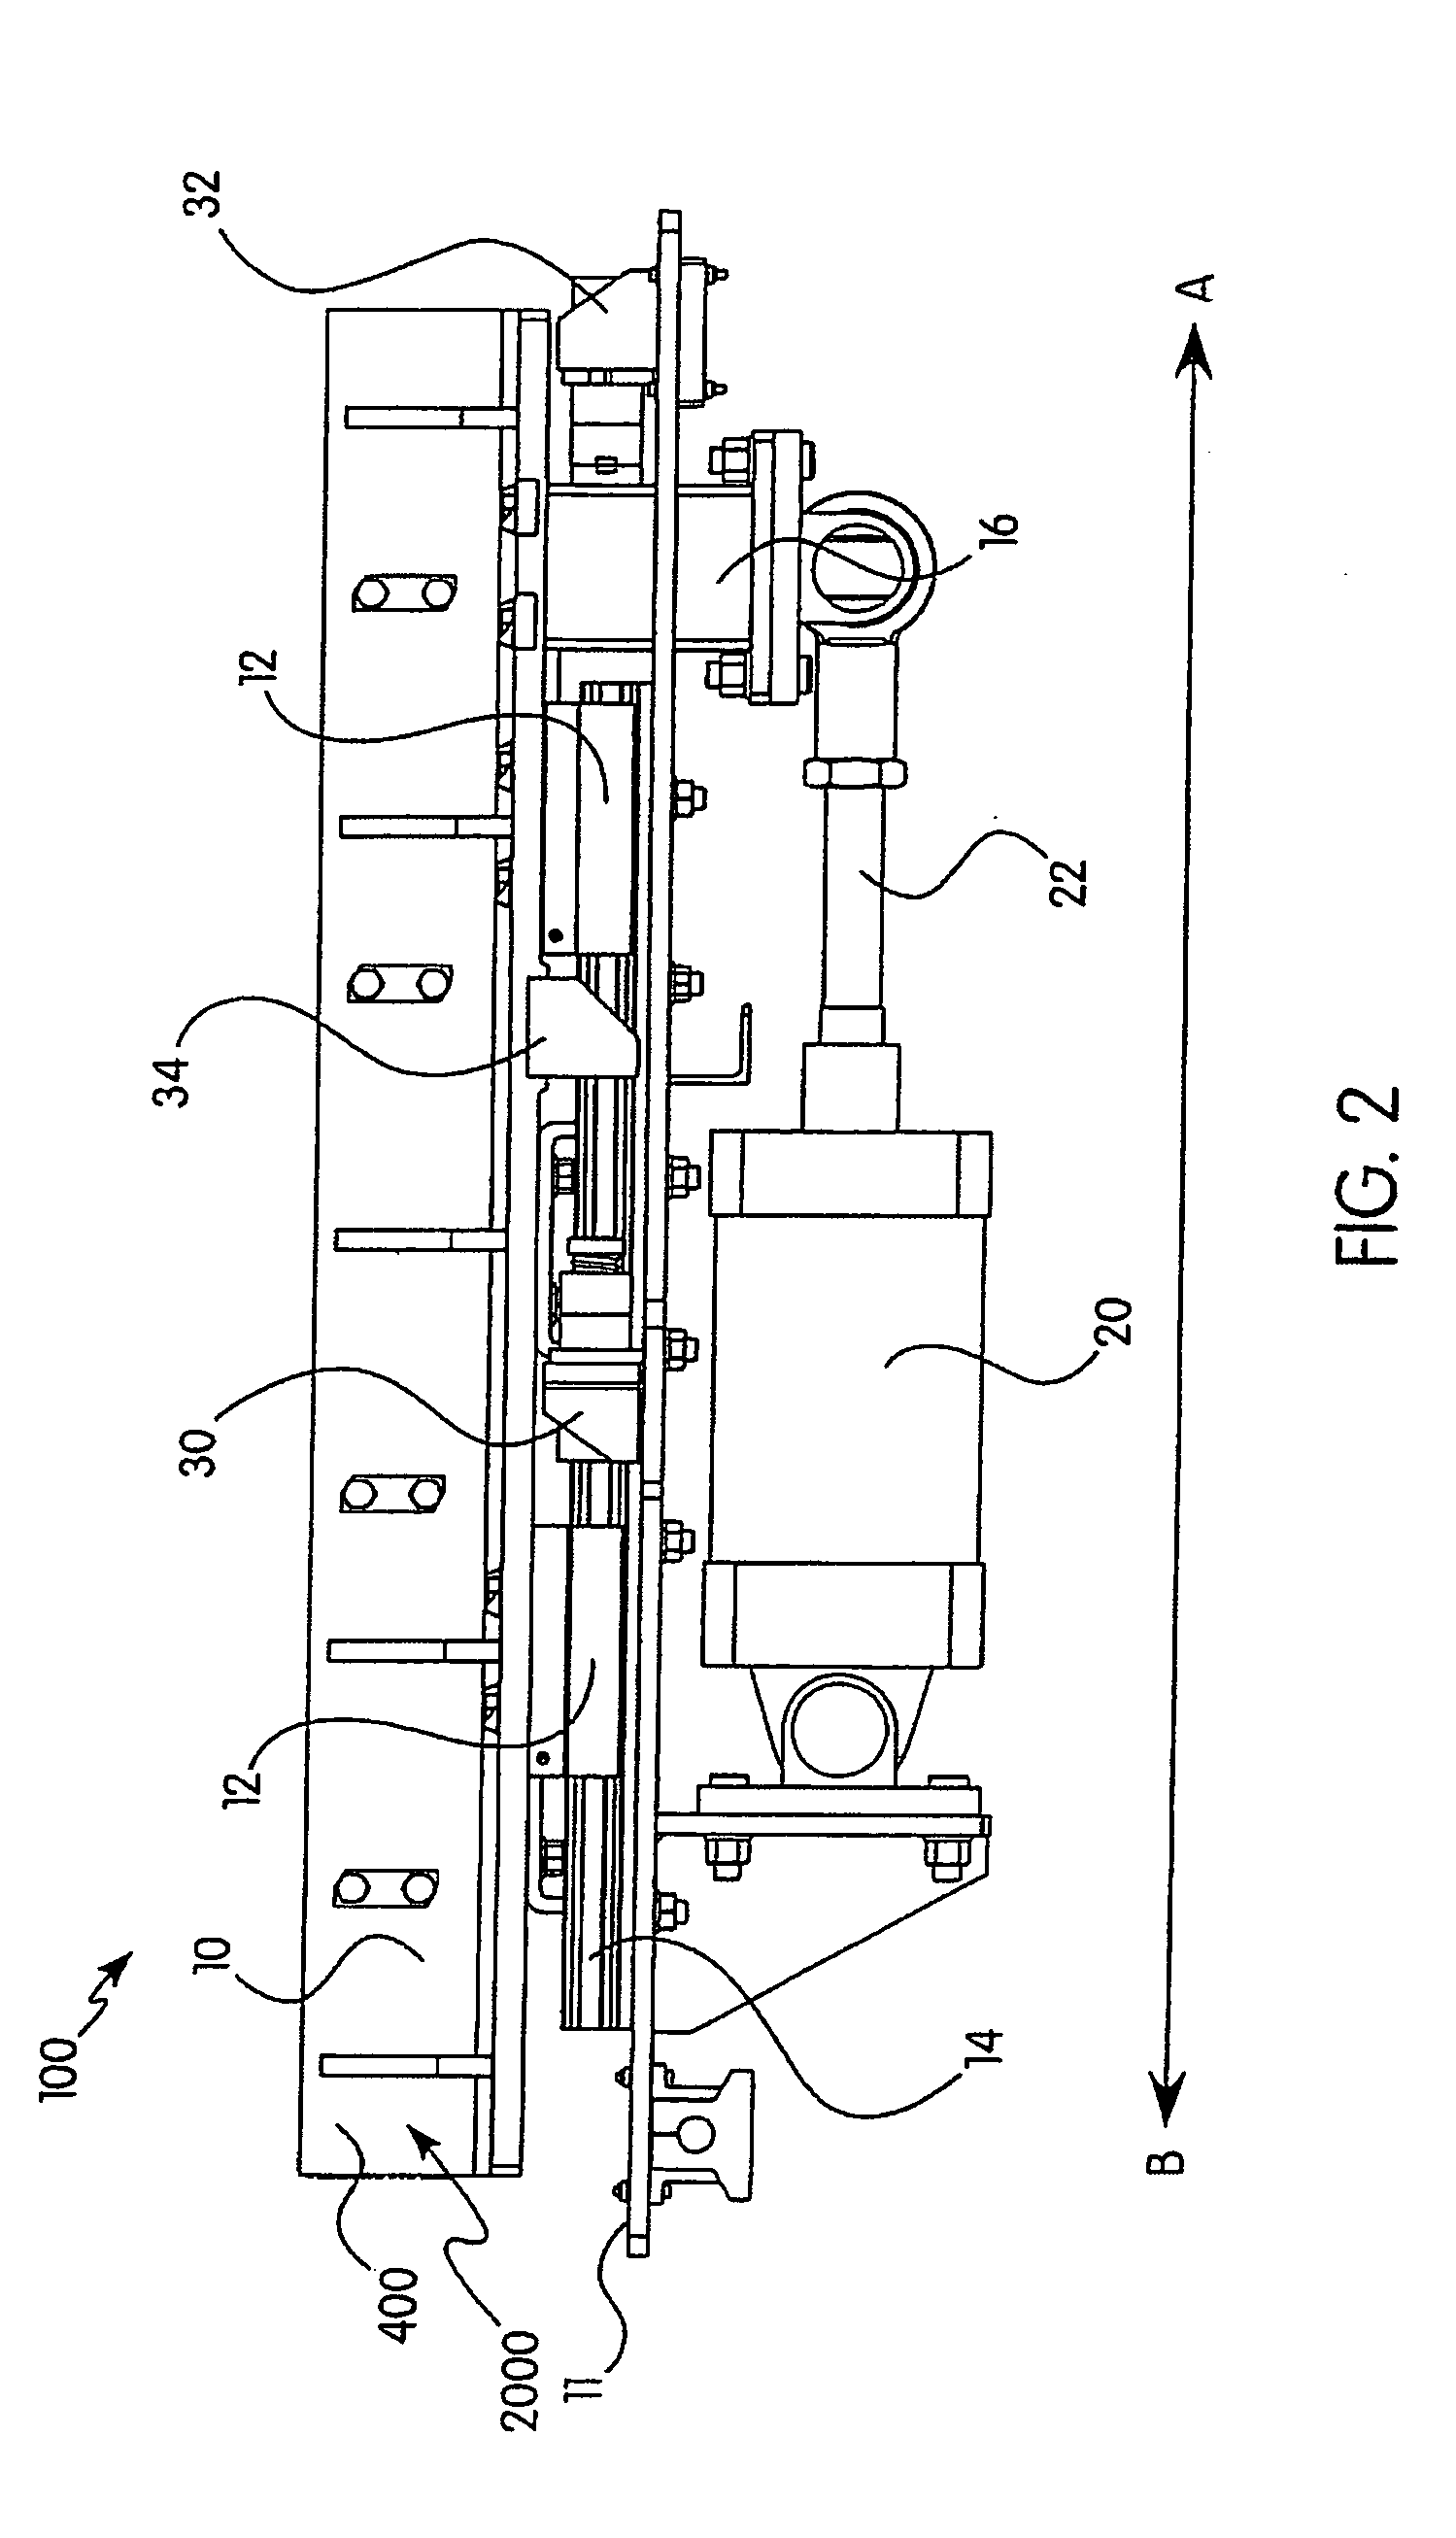 Selectively incrementally actuated linear eddy current braking system